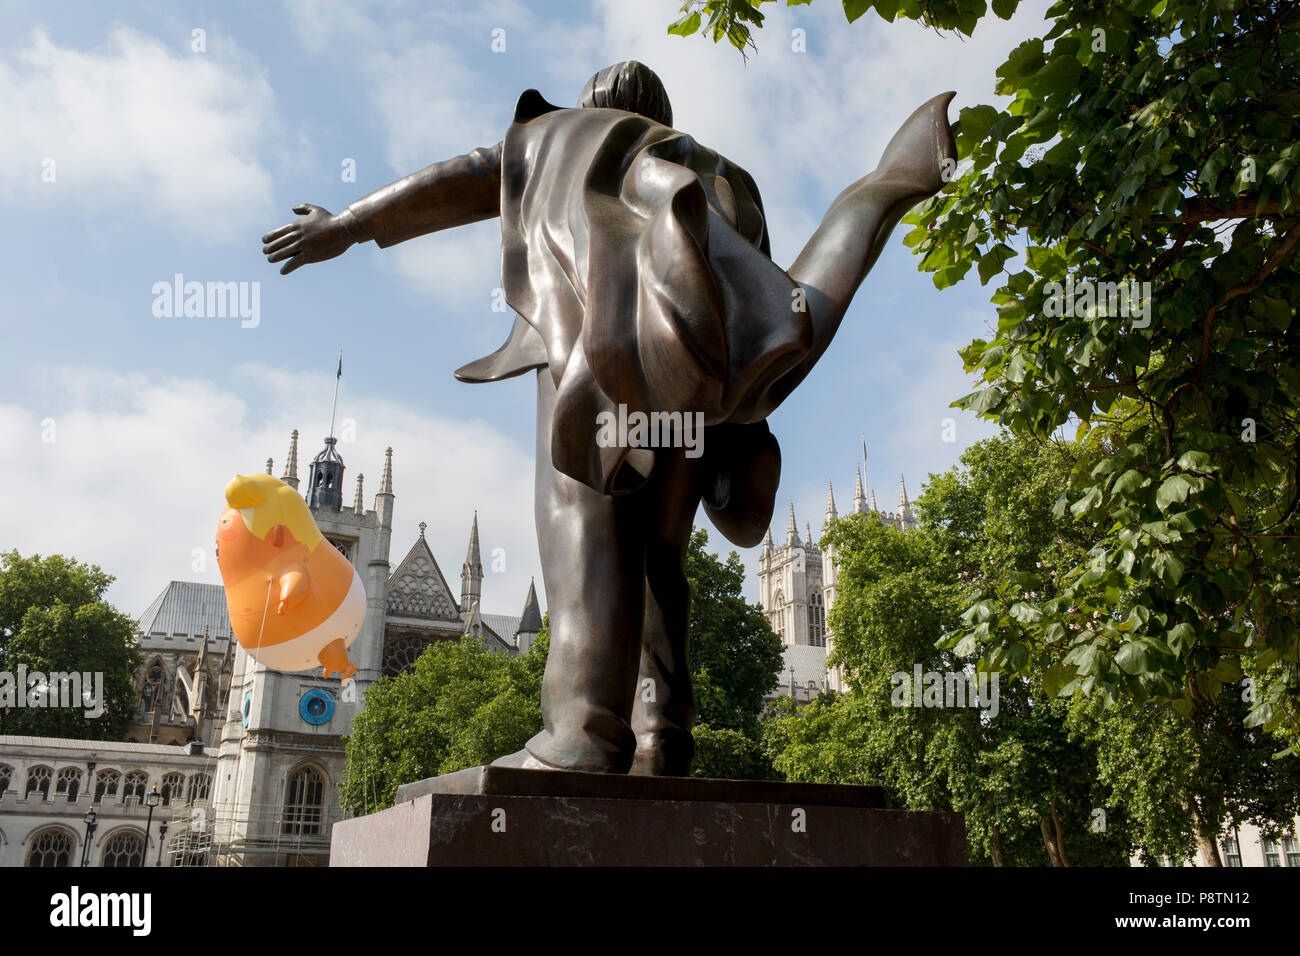 London, UK. 13th July, 2018. The inflatable balloon called Baby Trump flies above the statue of British statesman David Lloyd George in Parliament Square, Westminster, the seat of the UK Parliament, during the US President's visit to the UK. Baby Trump is a 20ft high orange blimp depicting the US President as an enraged, smartphone-clutching infant - and given special permission to appear above the capital by London Mayor Sadiq Khan because of its protest rather than artistic nature. It is the brainchild of Graphic designer Matt Bonner. Photo by Richard B Credit: RichardBaker/Alamy Live News Stock Photo